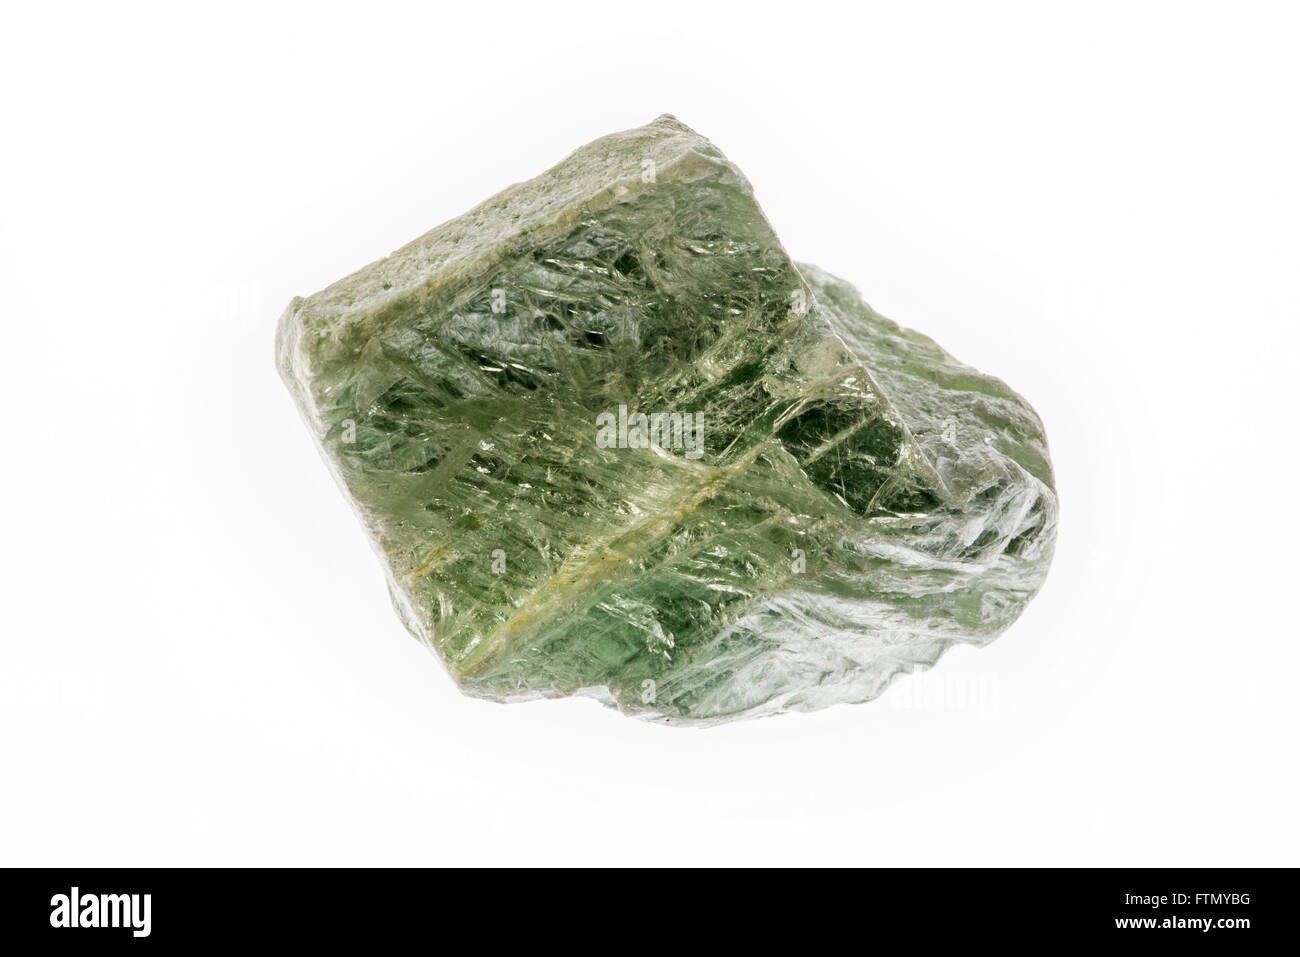 Talc specimen, clay mineral composed of hydrated magnesium silicate, on white background Stock Photo